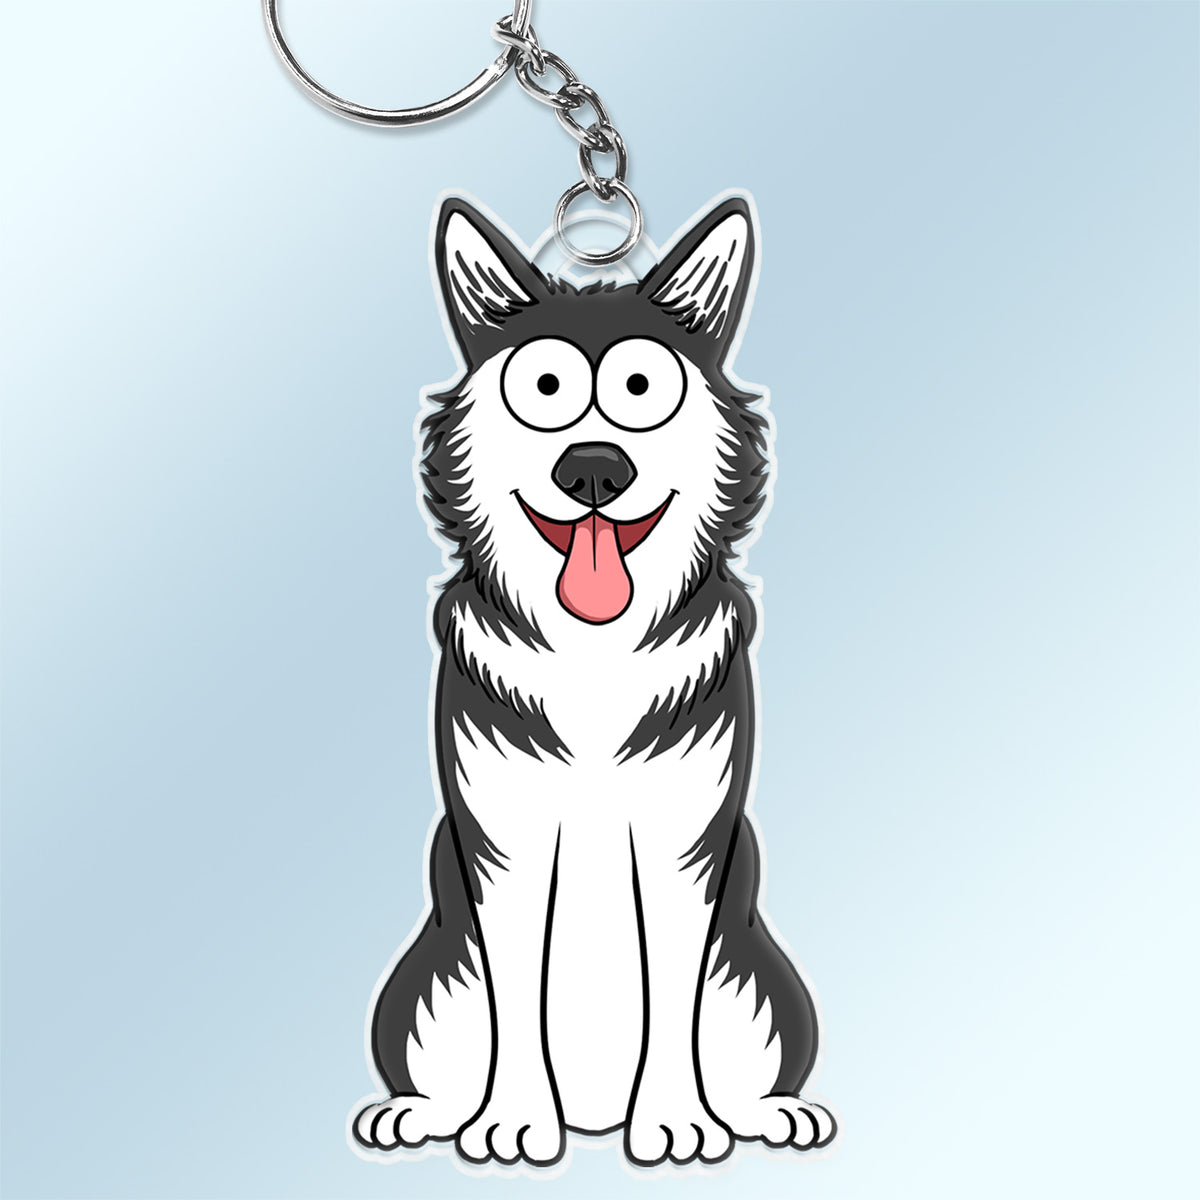 Funny Cartoon Pet - Gift For Cat Lovers, Dog Lovers - Personalized Cutout Acrylic Keychain